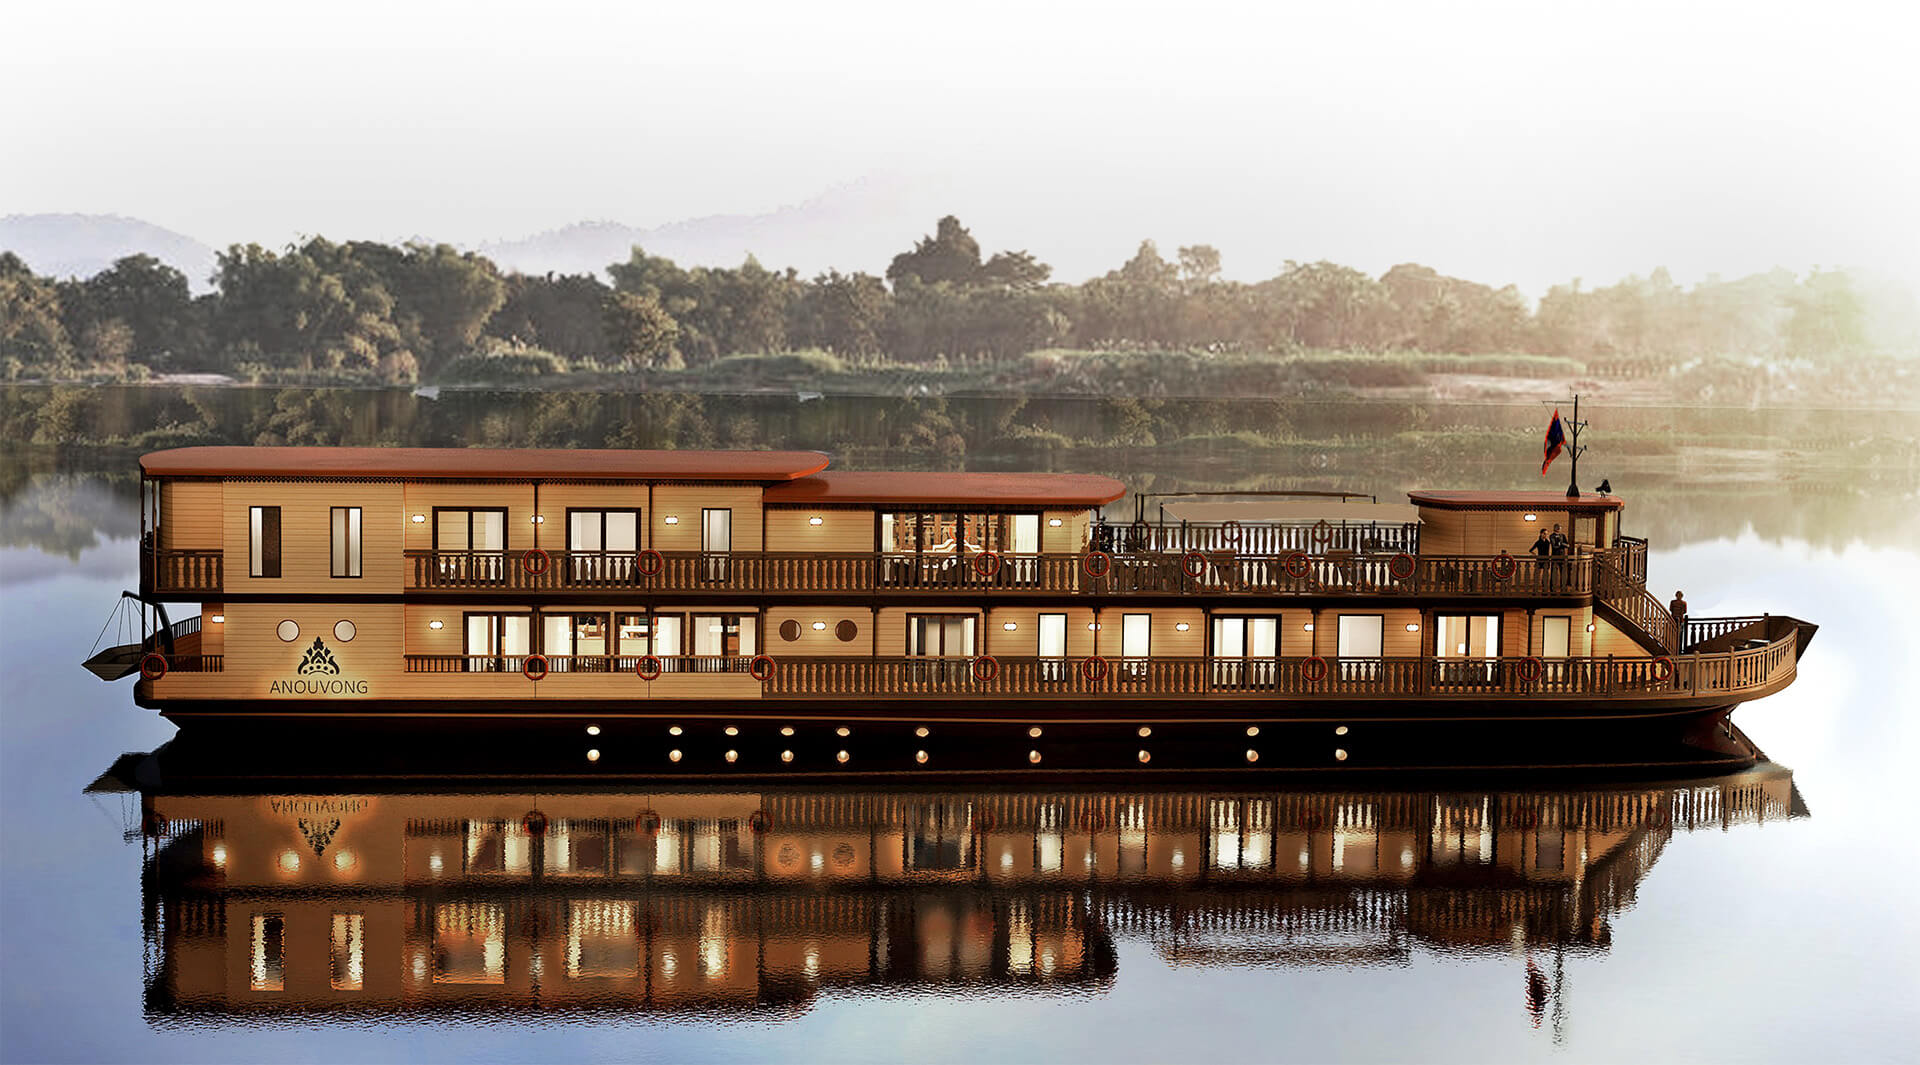 To Voyage along the Upper Mekong in Laos with the new ship Heritage Line Anouvong